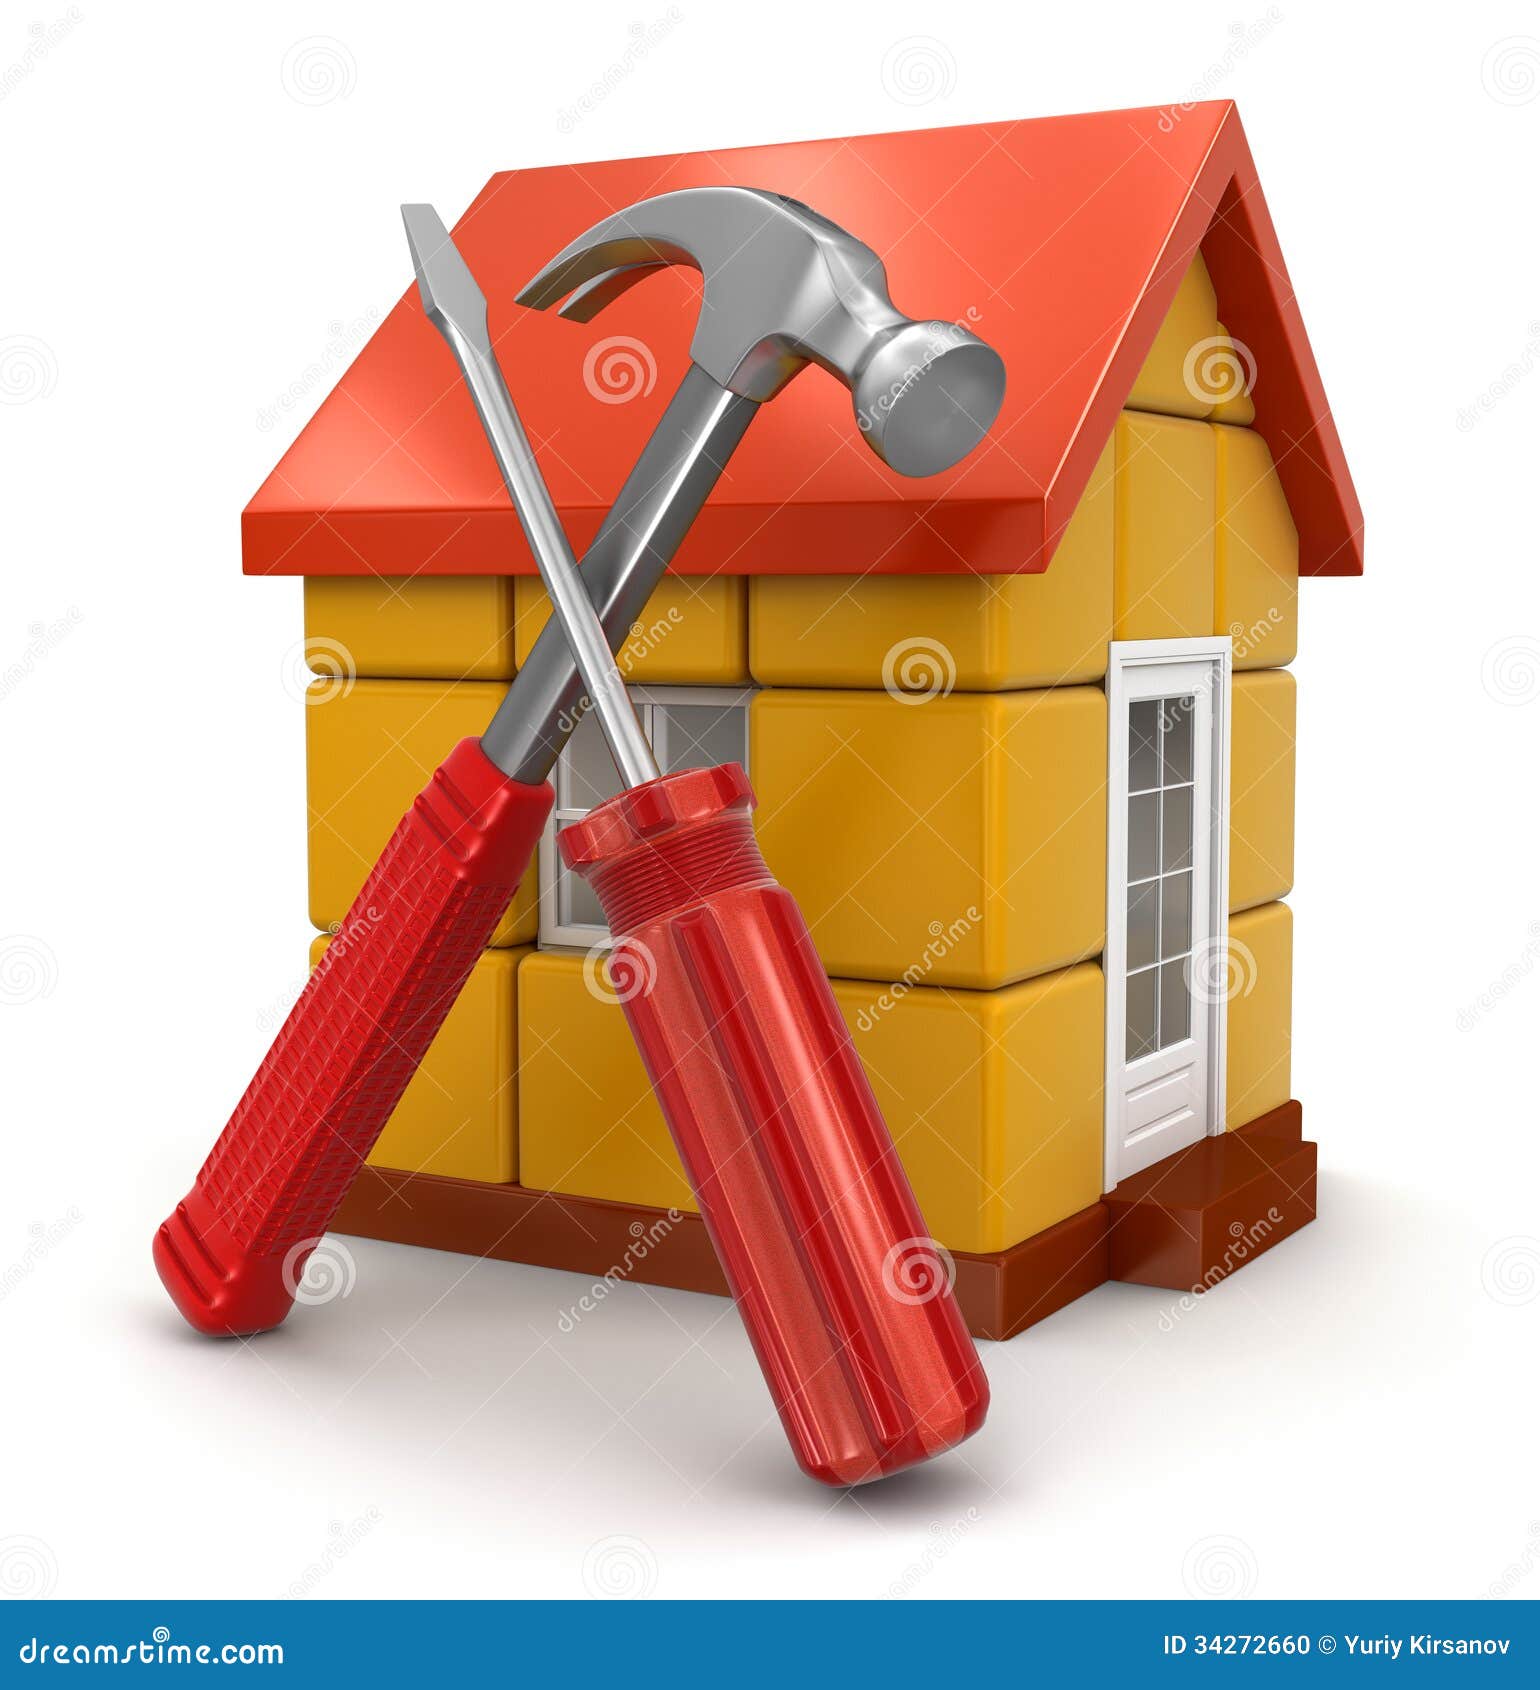 house and tools (clipping path included)